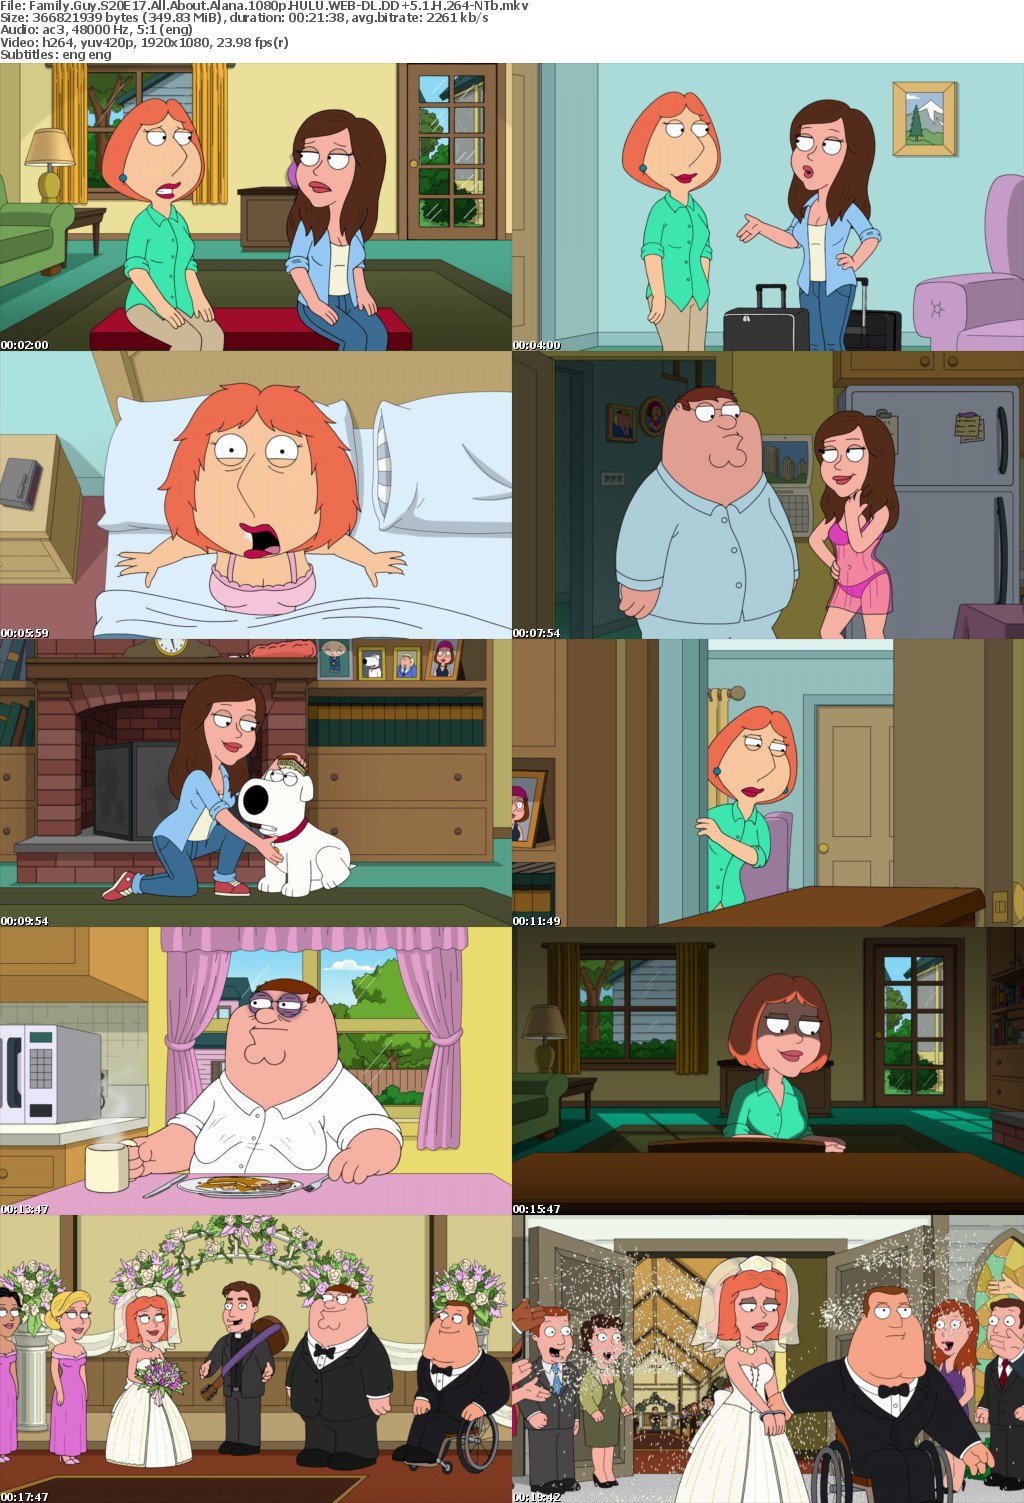 Family Guy S20E17 All About Alana 1080p HULU WEBRip DDP5 1 x264-NTb